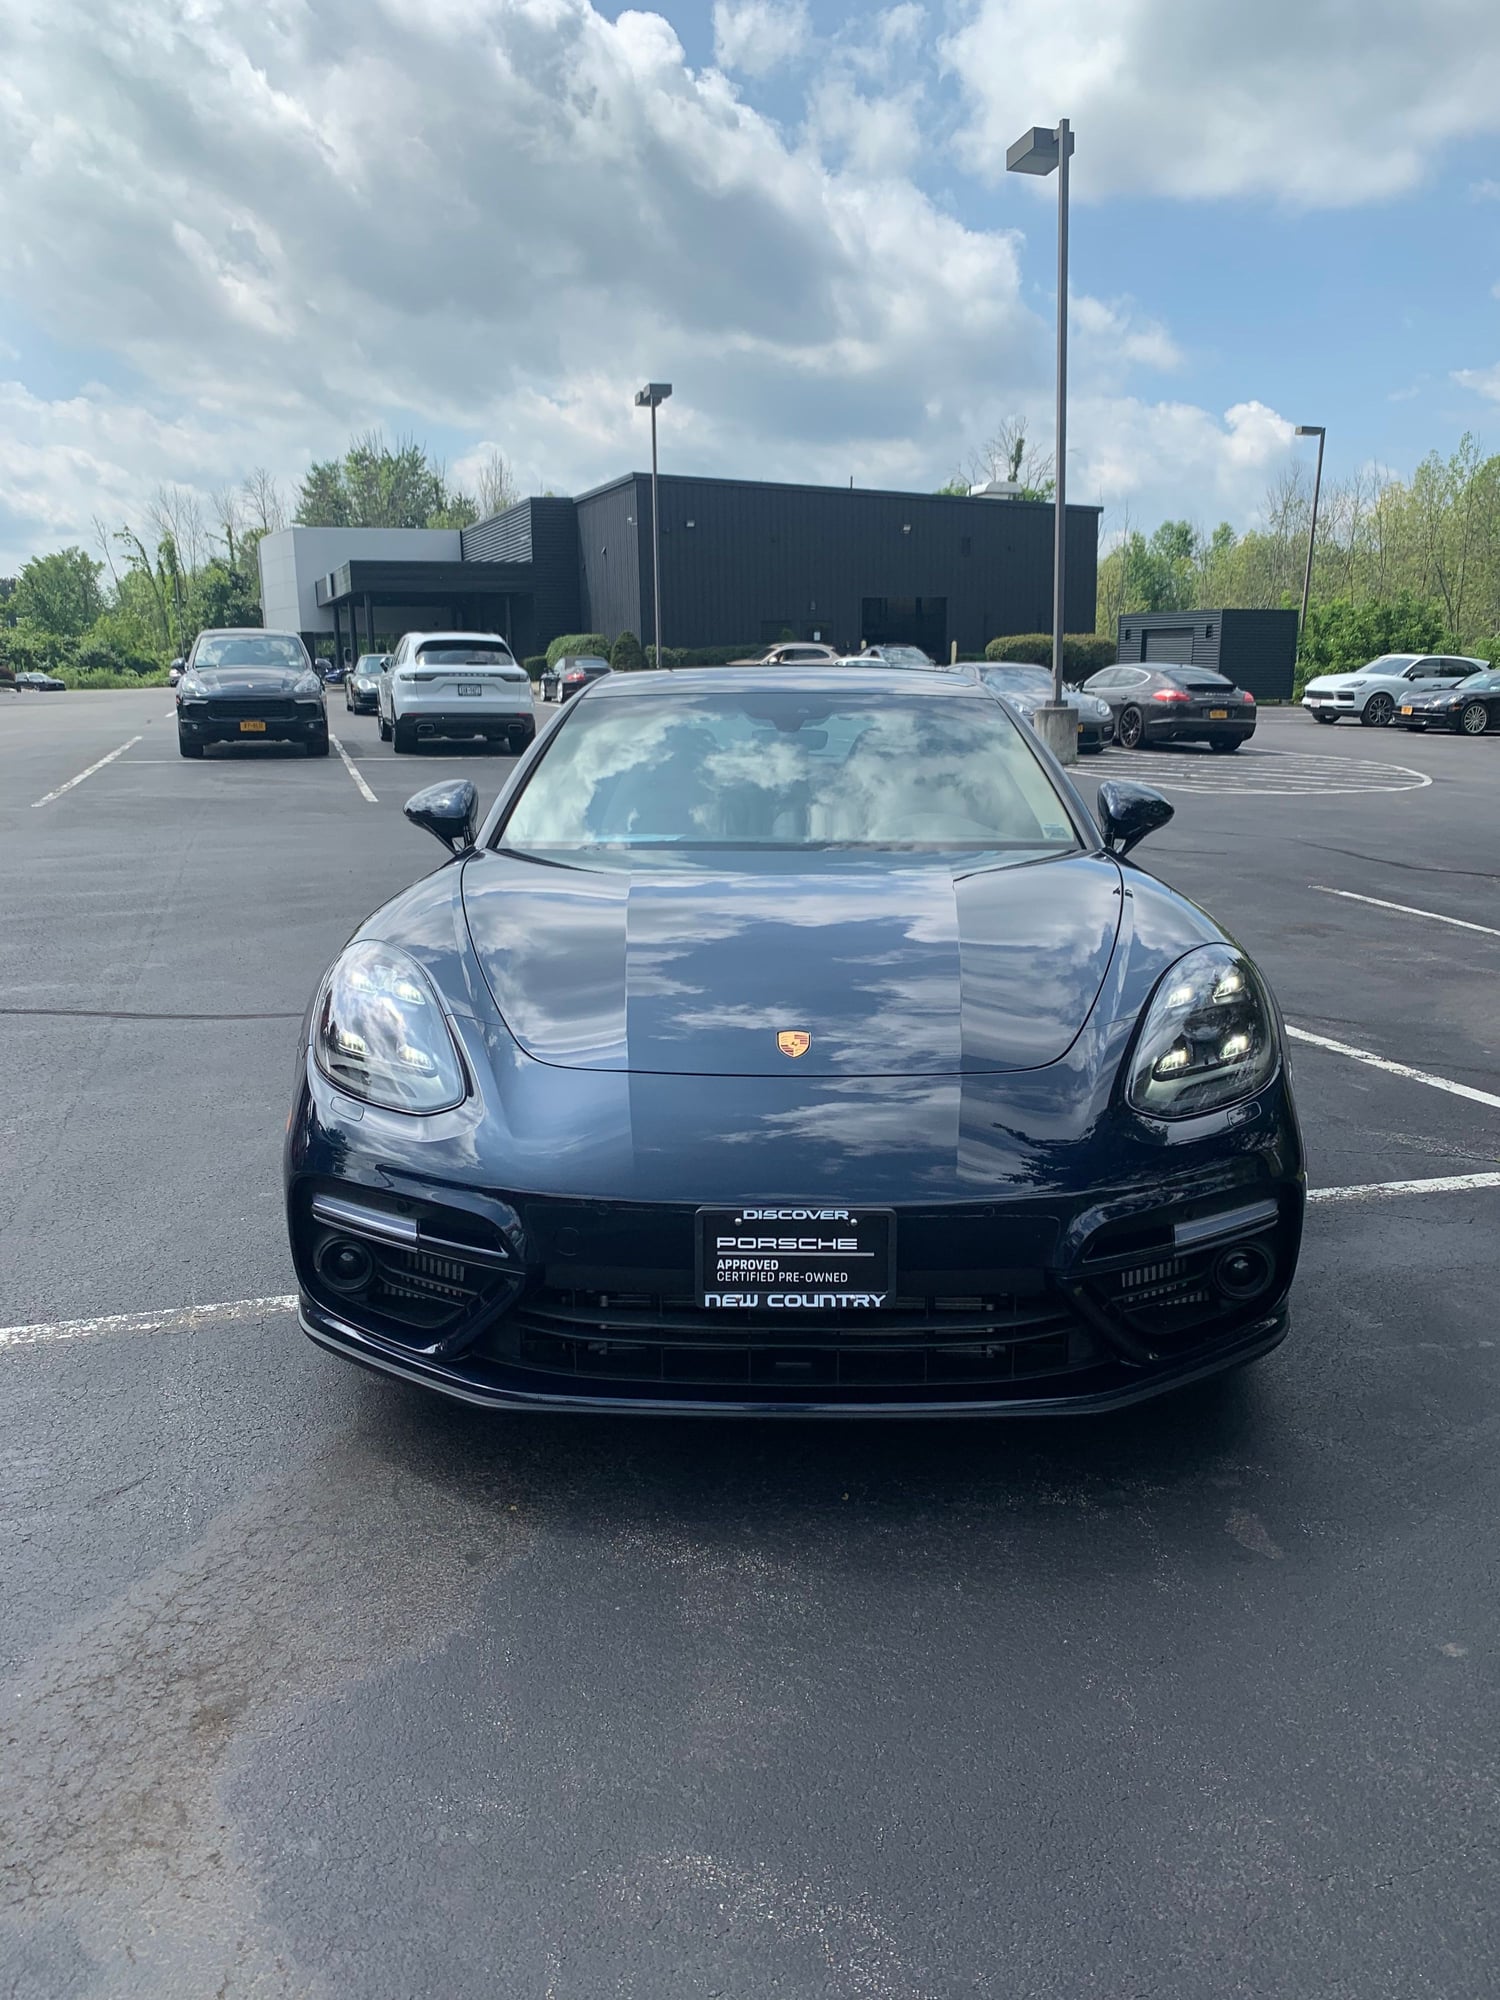 2017 Porsche Panamera - For Sale 2018 Sport Turismo Turbo - Used - VIN WPOCF2A76JL196092 - 18,300 Miles - 8 cyl - AWD - Automatic - Wagon - Blue - Woodcliff Lake, NJ 07677, United States